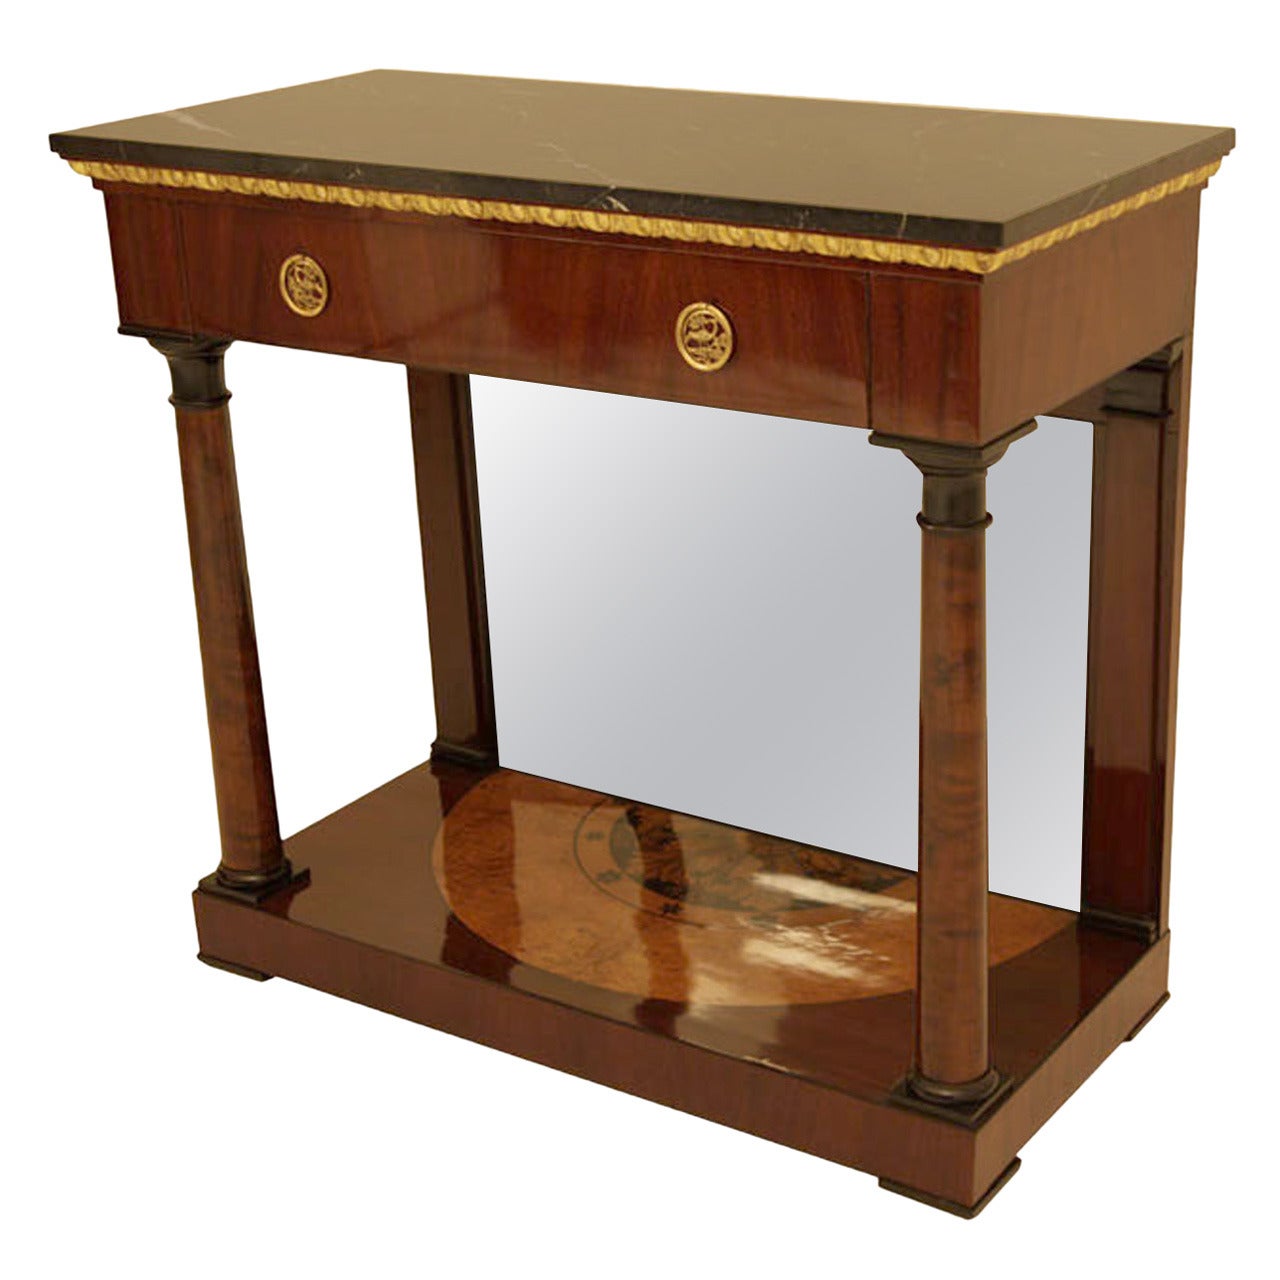 Wonderful Biedermeier Console, Danube Monarchy, Dating from the 1820s